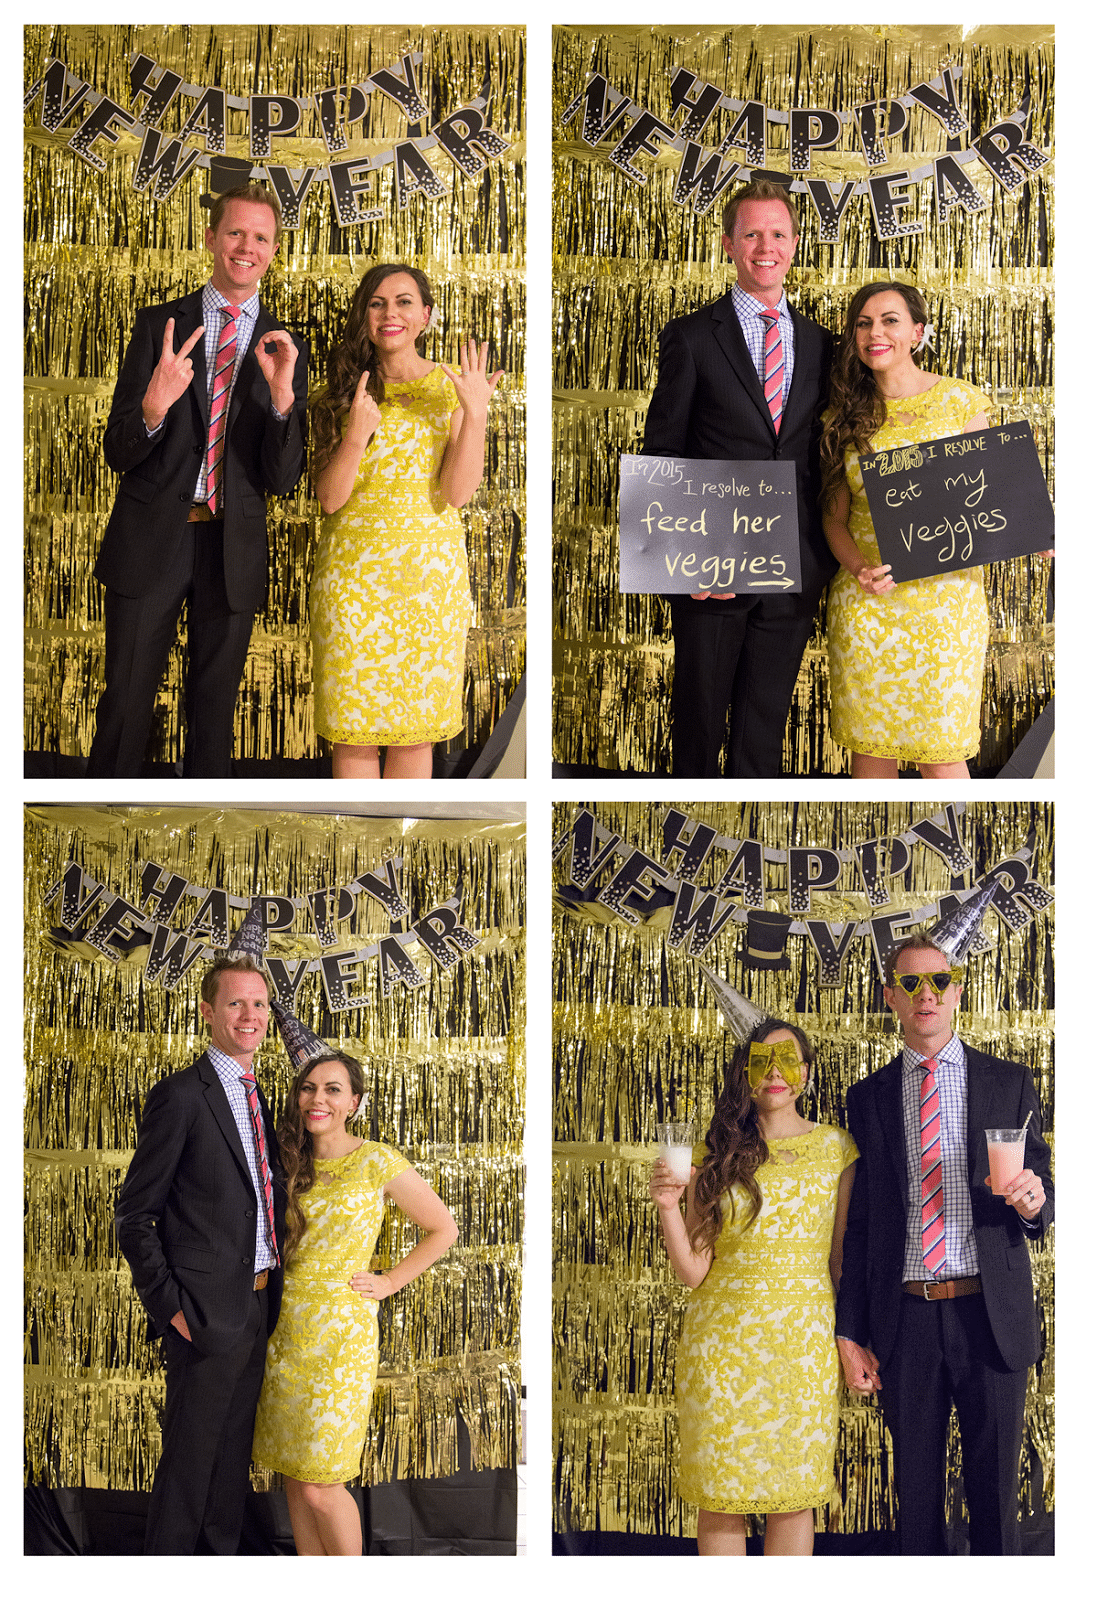 New Year's Eve Photo Booth Ideas